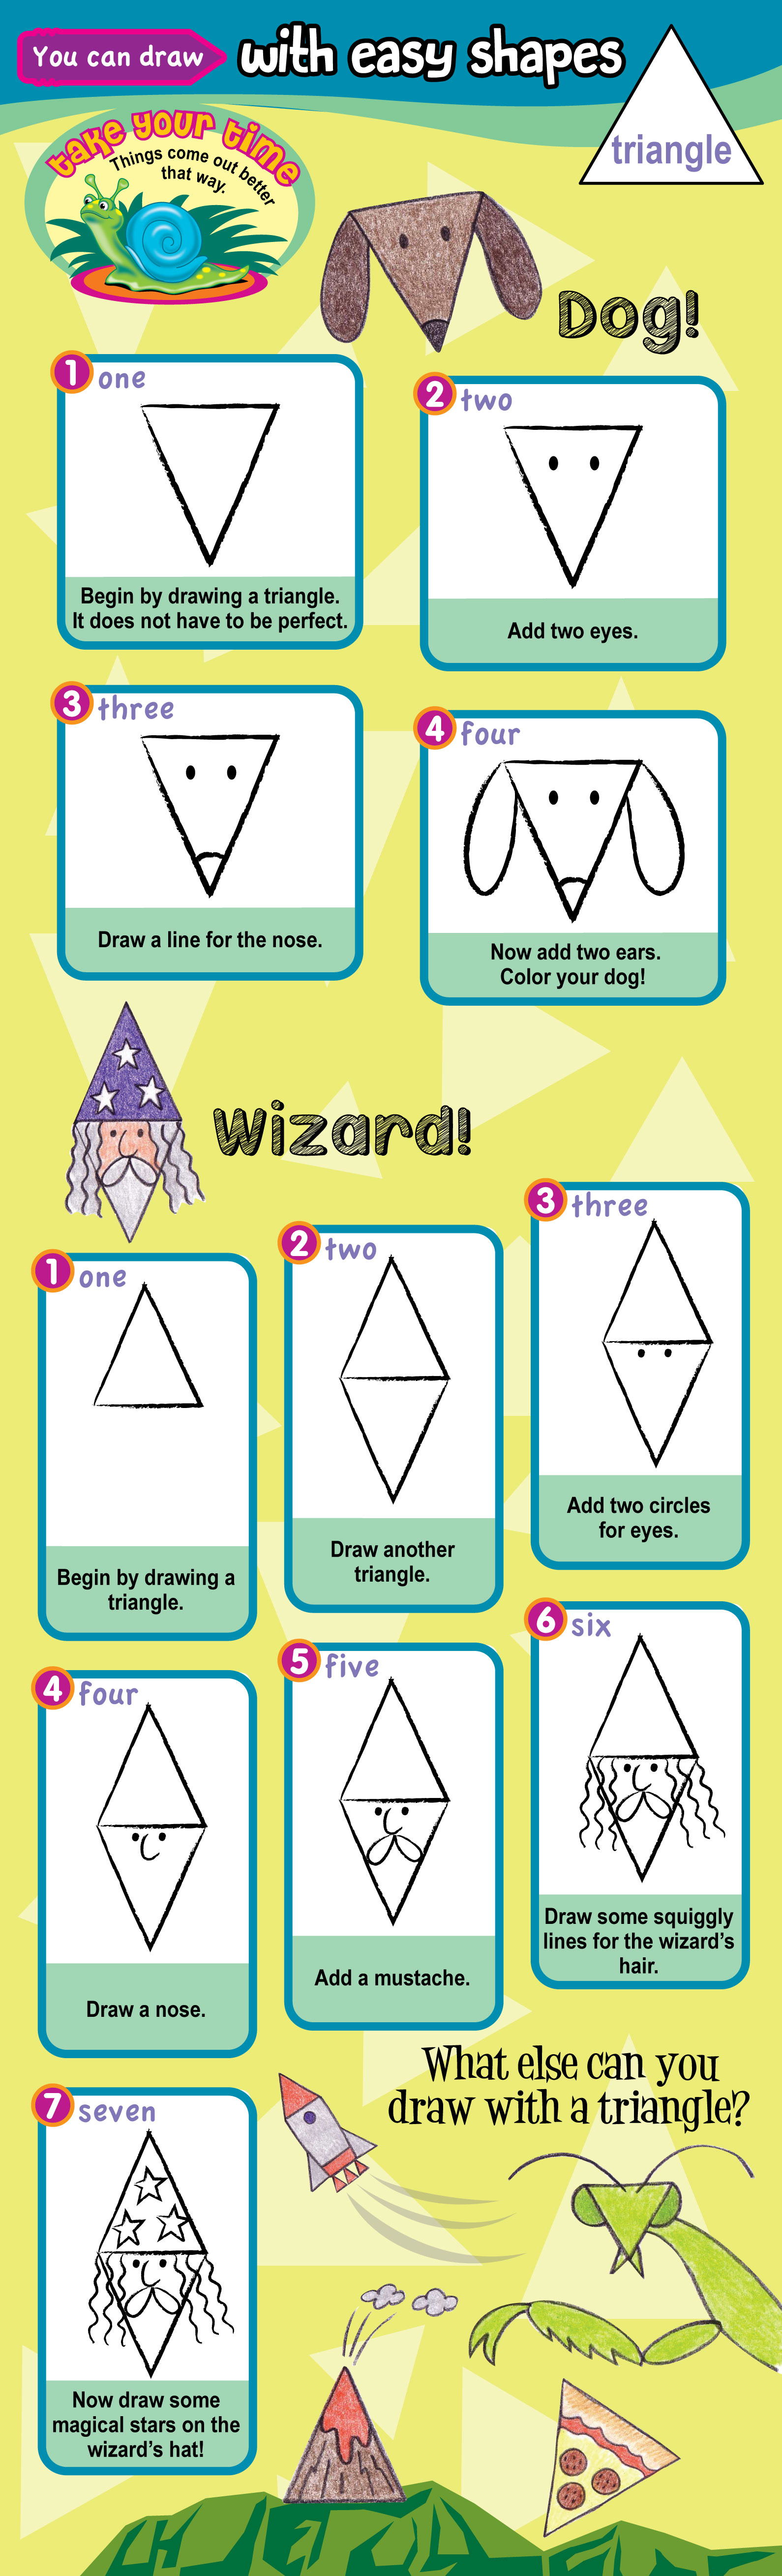 draw a dog and wizard with triangles in easy steps